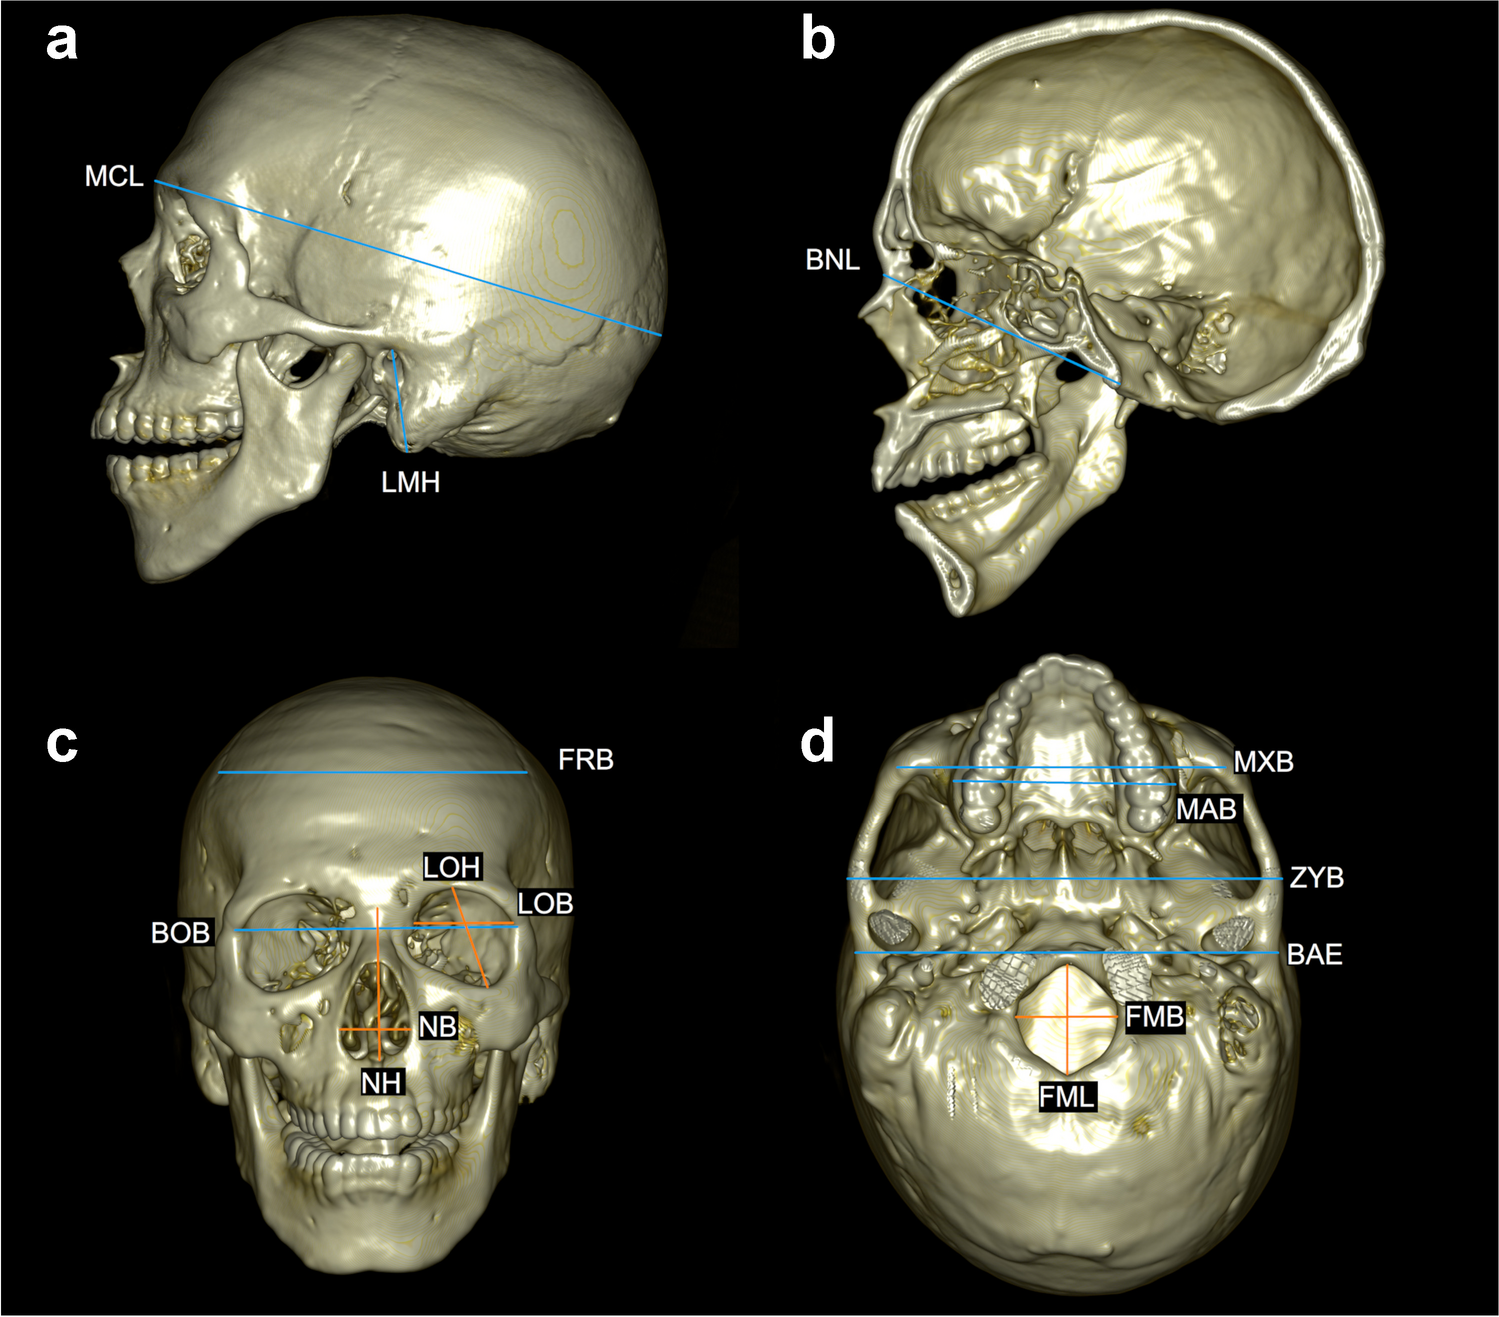 Estimation of ancestry from cranial measurements based on MDCT data acquired in a Japanese and Western Australian population